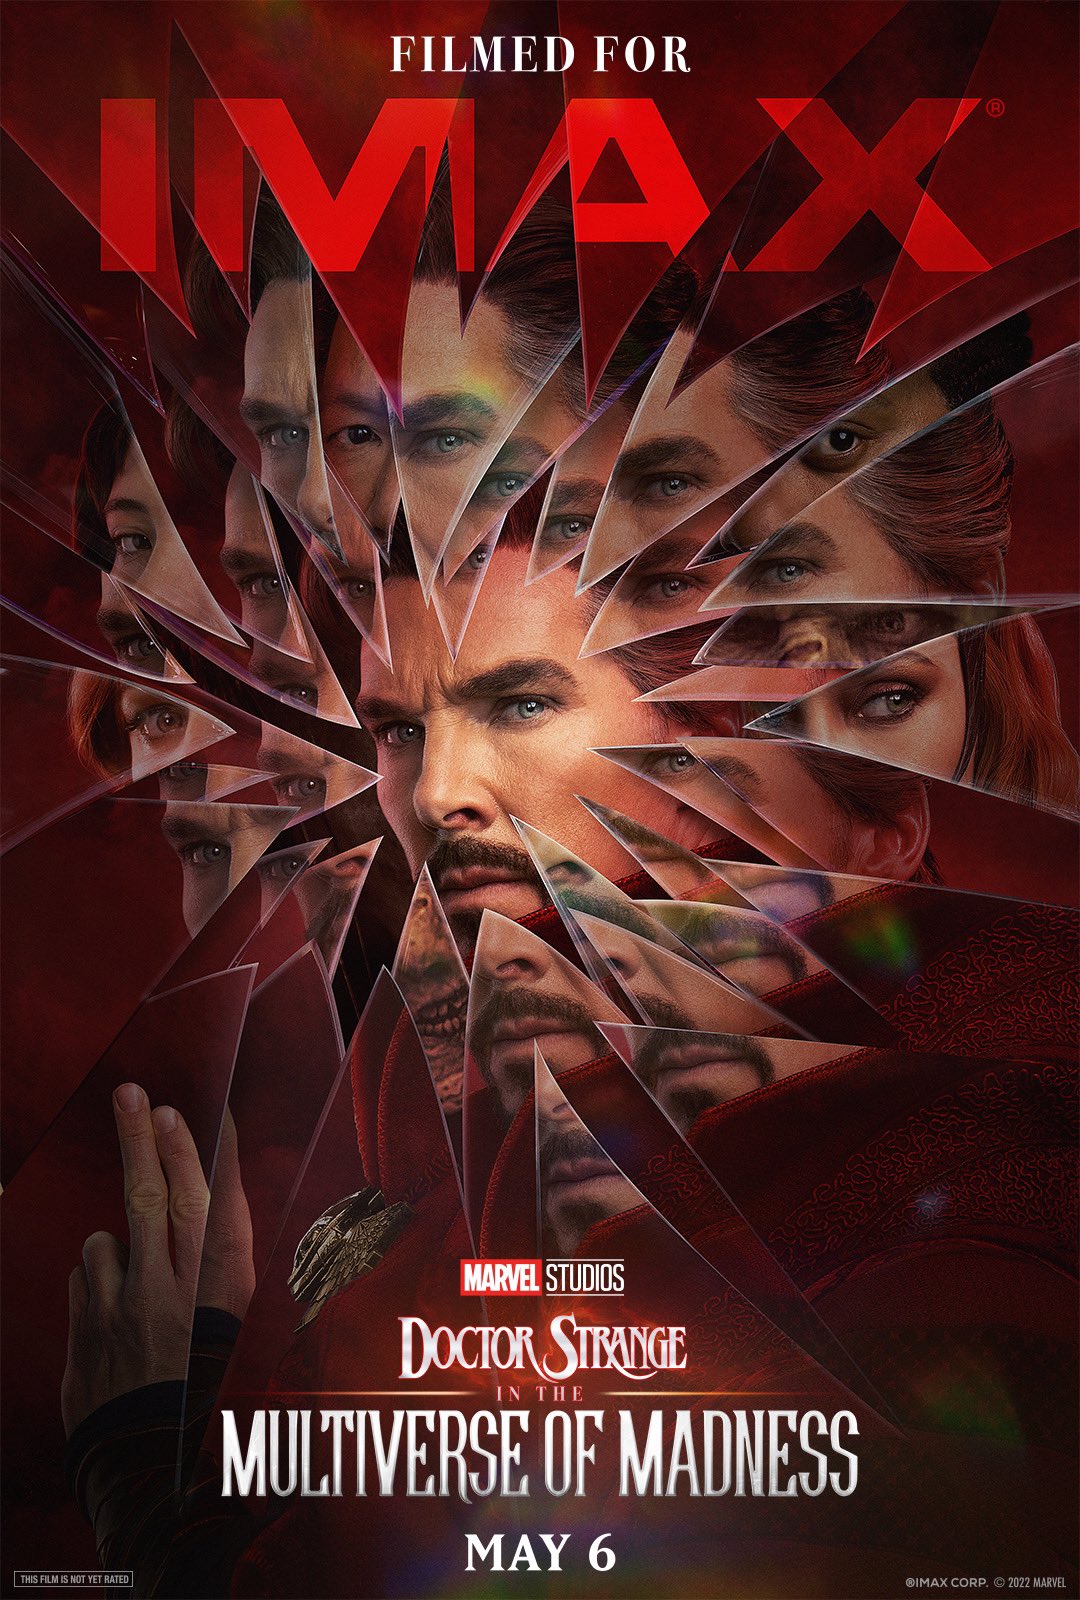 'Doctor Strange in the Multiverse of Madness' Shares New Interviews and